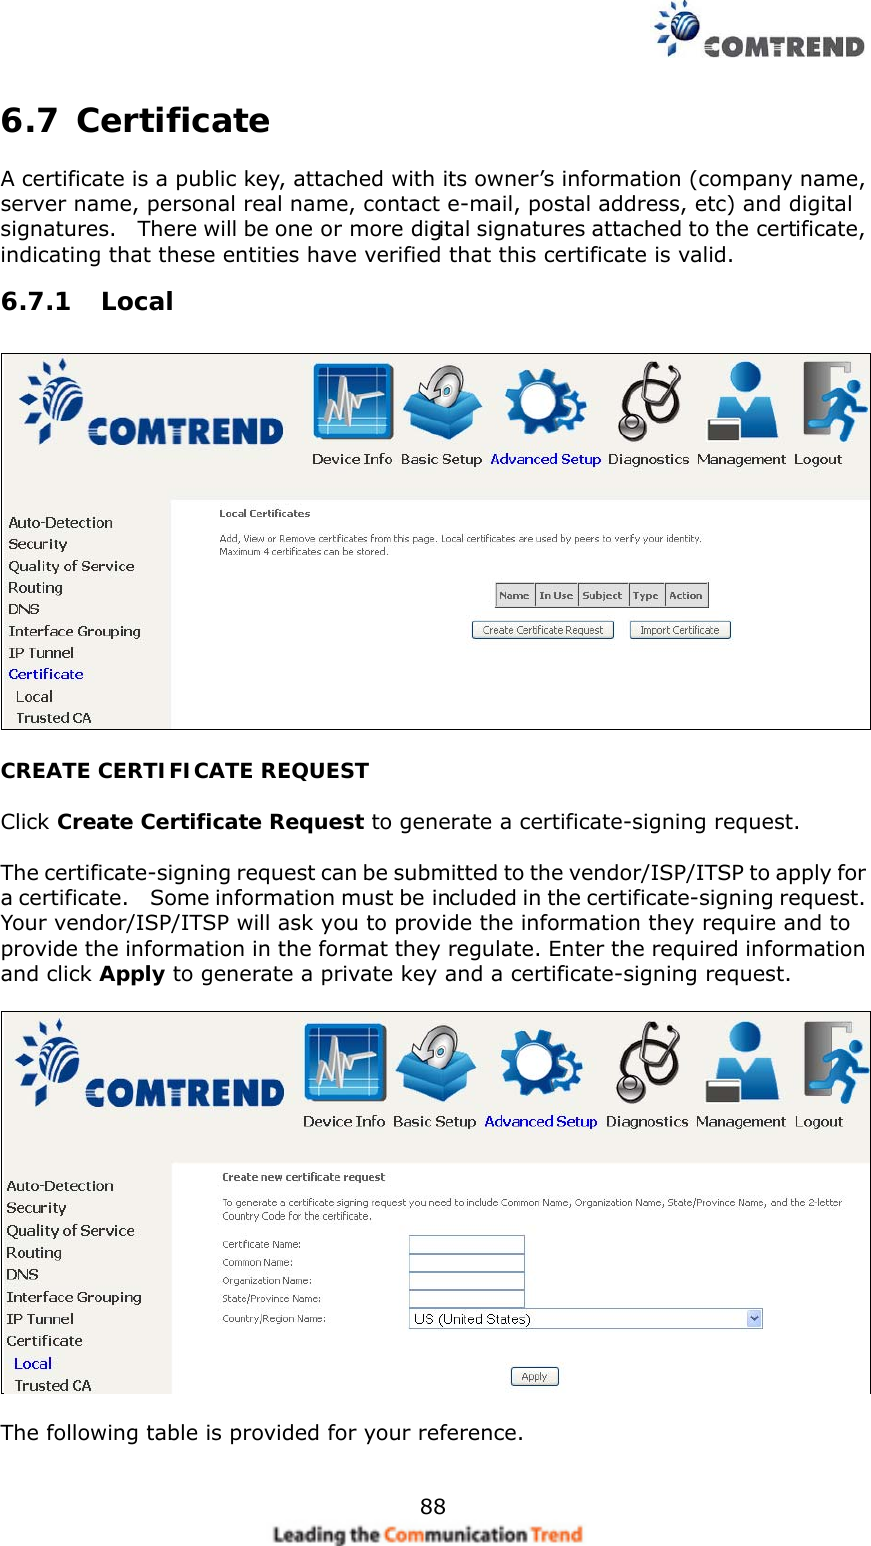    88 6.7 Certificate  A certificate is a public key, attached with its owner’s information (company name, server name, personal real name, contact e-mail, postal address, etc) and digital signatures.    There will be one or more digital signatures attached to the certificate, indicating that these entities have verified that this certificate is valid. 6.7.1 Local  CREATE CERTIFICATE REQUEST  Click Create Certificate Request to generate a certificate-signing request.    The certificate-signing request can be submitted to the vendor/ISP/ITSP to apply for a certificate.    Some information must be included in the certificate-signing request.   Your vendor/ISP/ITSP will ask you to provide the information they require and to provide the information in the format they regulate. Enter the required information and click Apply to generate a private key and a certificate-signing request.      The following table is provided for your reference.  